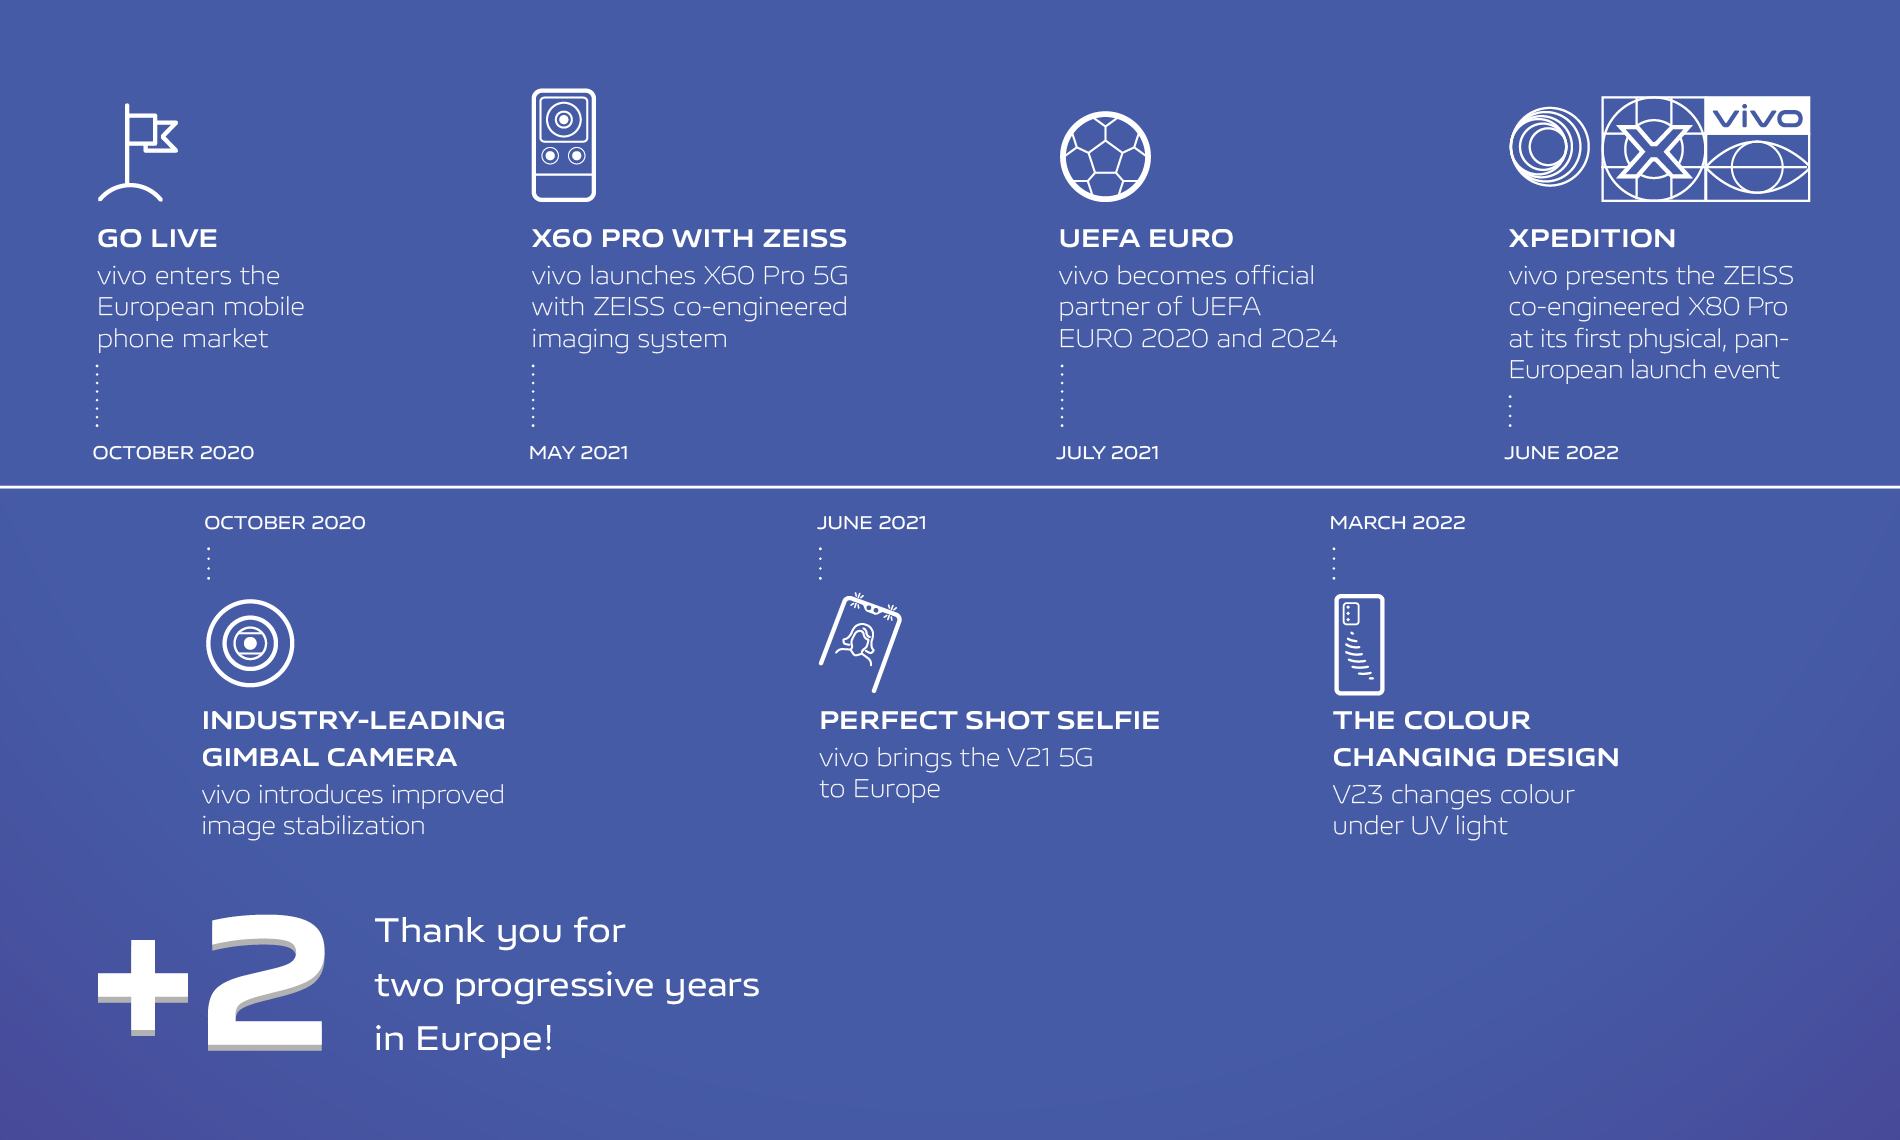 vivo marks its second year in Europe